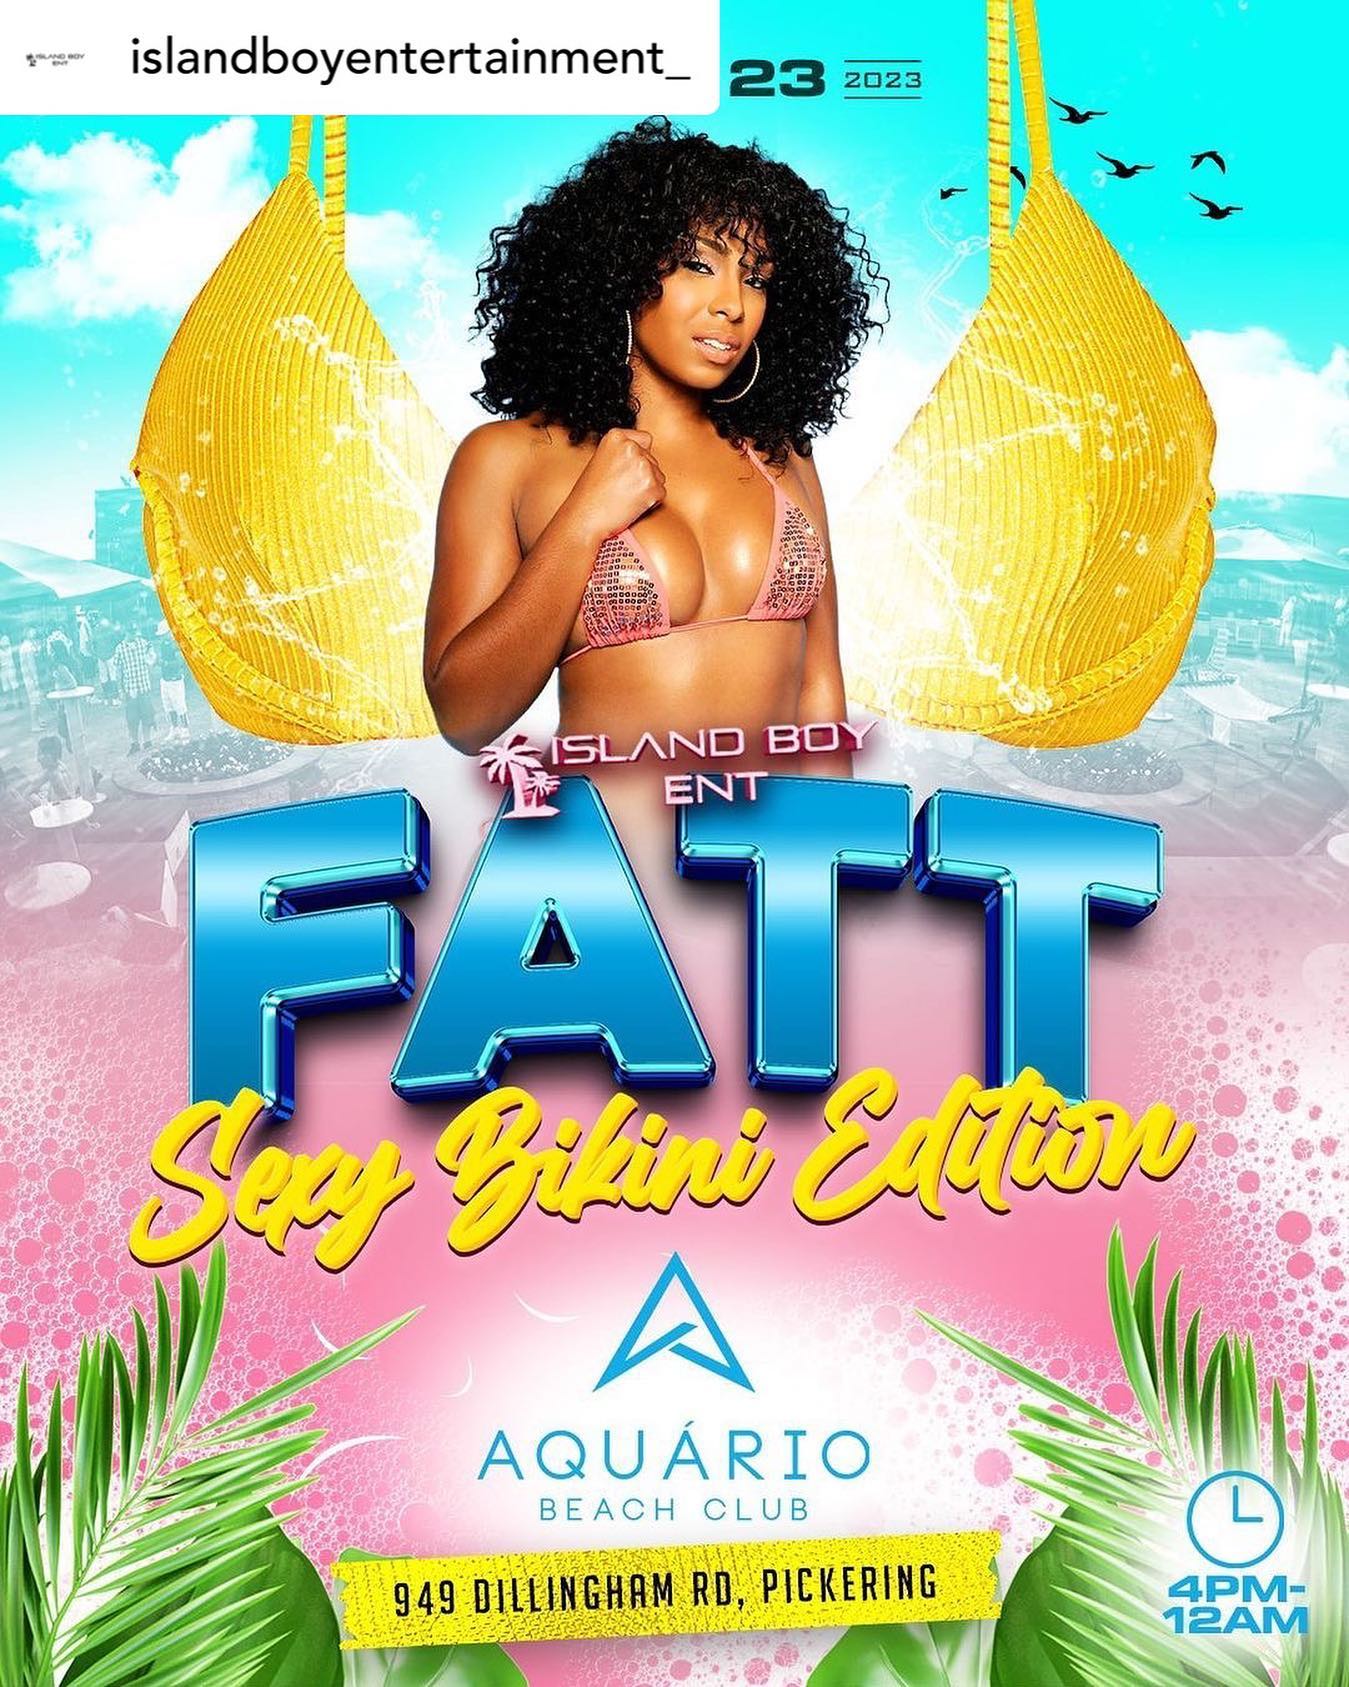 Island Boy Ent Presents 

FATT “Sexy Bikini  Edition”.

Sunday July 23rd 2023 

Event Take place at Aquario Beach Club 
@aquariobeach 🏖️ 4-12 ! 

1st 100 people receive Island Boy Ent /FATT Merch/ Goodies !

This event Ladies it’s all about you! We want to see the sexiest bikinis  you got , there will be a grand prize for SEXIEST BIKINI!

FATT returns Bigger than ever with The top Dancehall and Soca DJs in the City !

All star DJ Line up:
@fyahblaziin 
@mrworkinghours 
@blackreactionsound 
@itsmenacethedj 
@monagallissound 
@dj.bxnny_ 
@deejayreece_ 
@djscrewinternational 

Early Vibes :
@_flamethedj 
@icon416 
@elevatethedj 

Hosted by :
@rosie_posie2011 
leedonnnn (Loud Ent)
@elta.inc 
@glo_kxng_ 

Sponsored by : 
@nugenentertainment 
GHOST ENT

For booths and Bottles  Contact ; 

@islandboyentertainment_ ISLAND BOY 
Dm or 647 572 3501 

Tickets online the ticketport.com